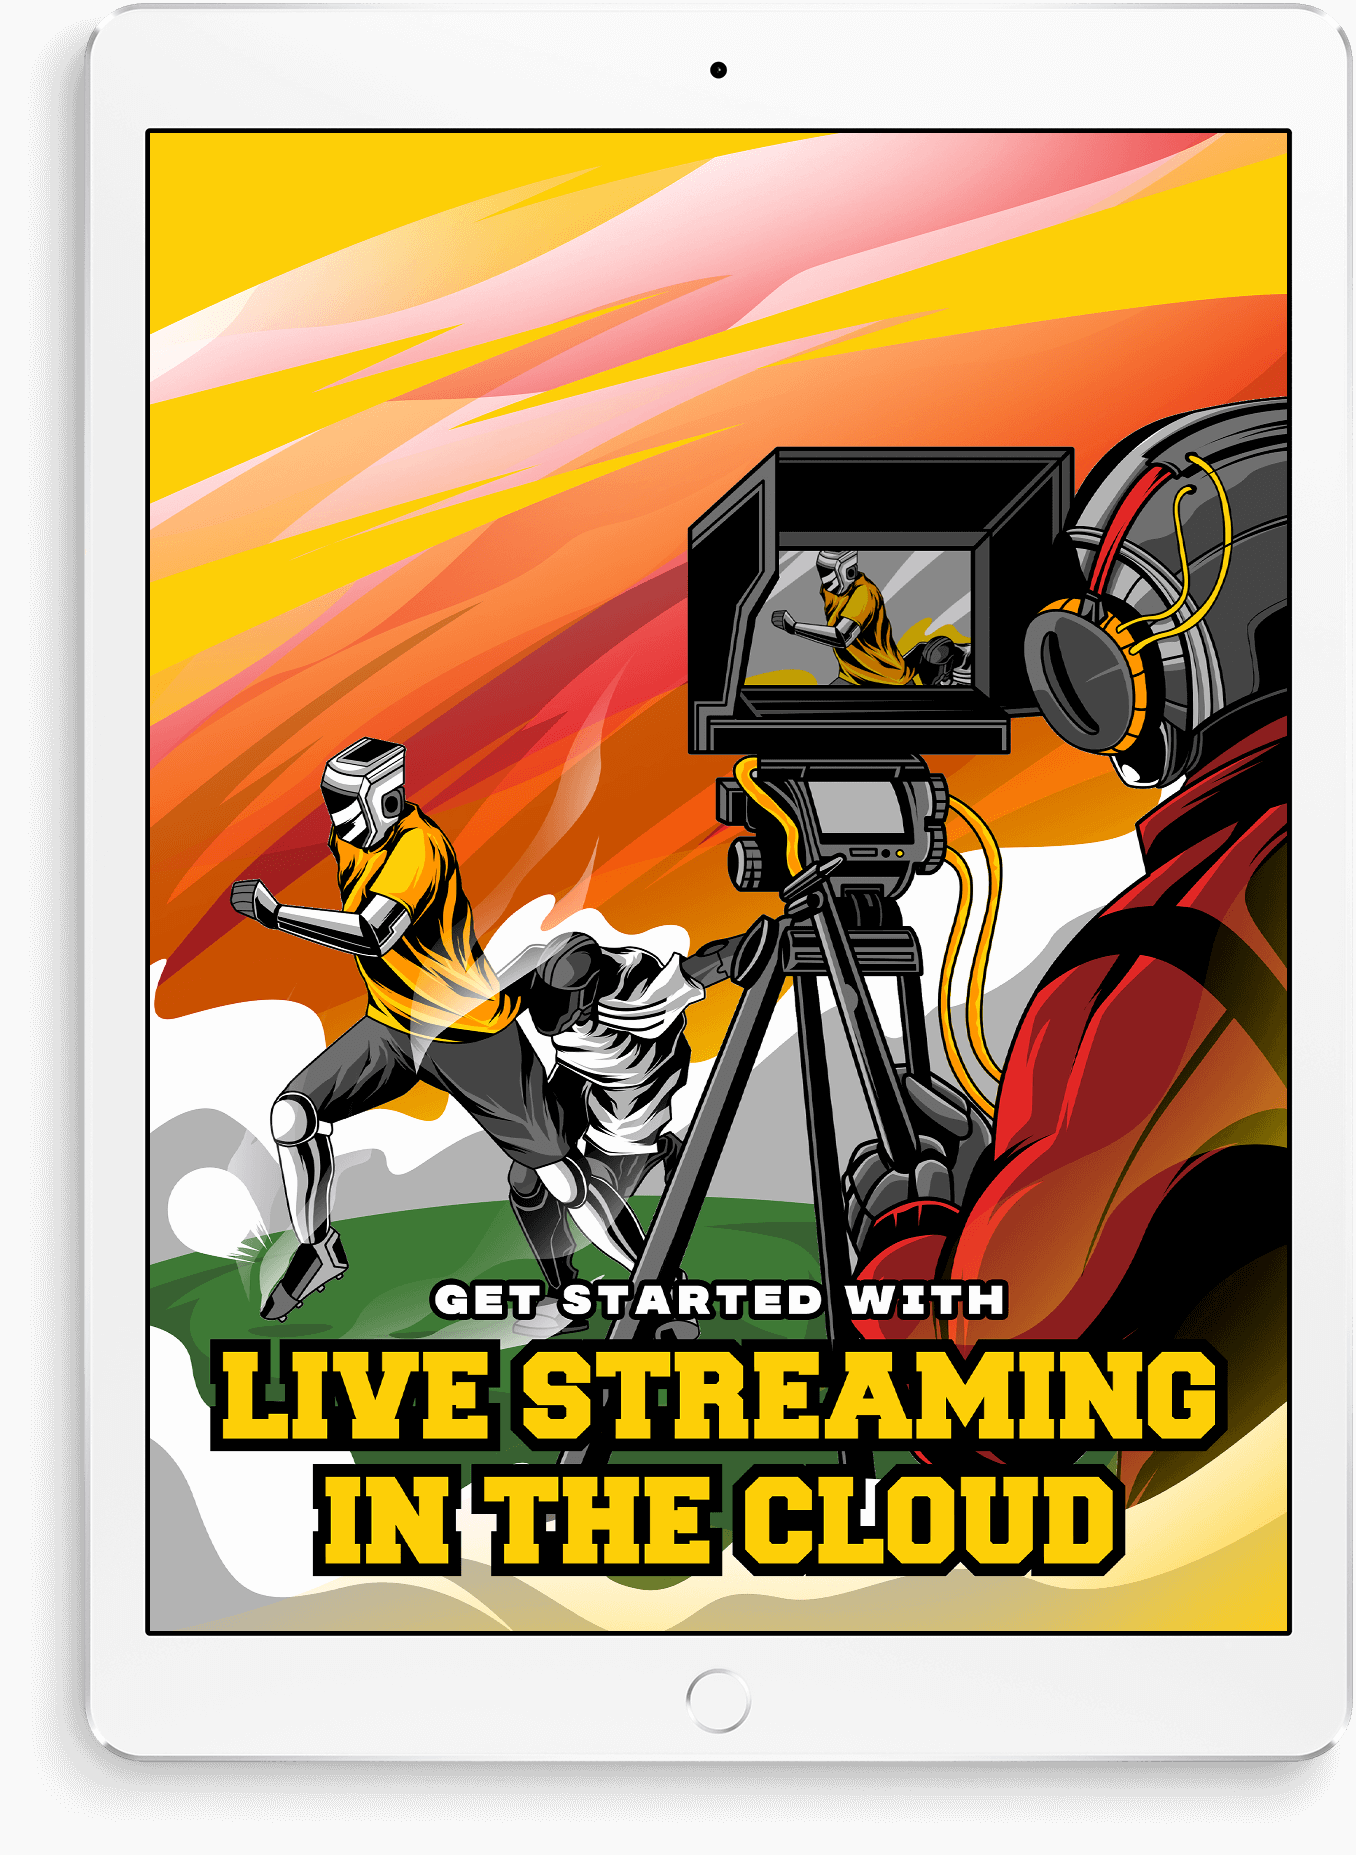 GET STARTED WITH LIVE STREAMING IN THE CLOUD